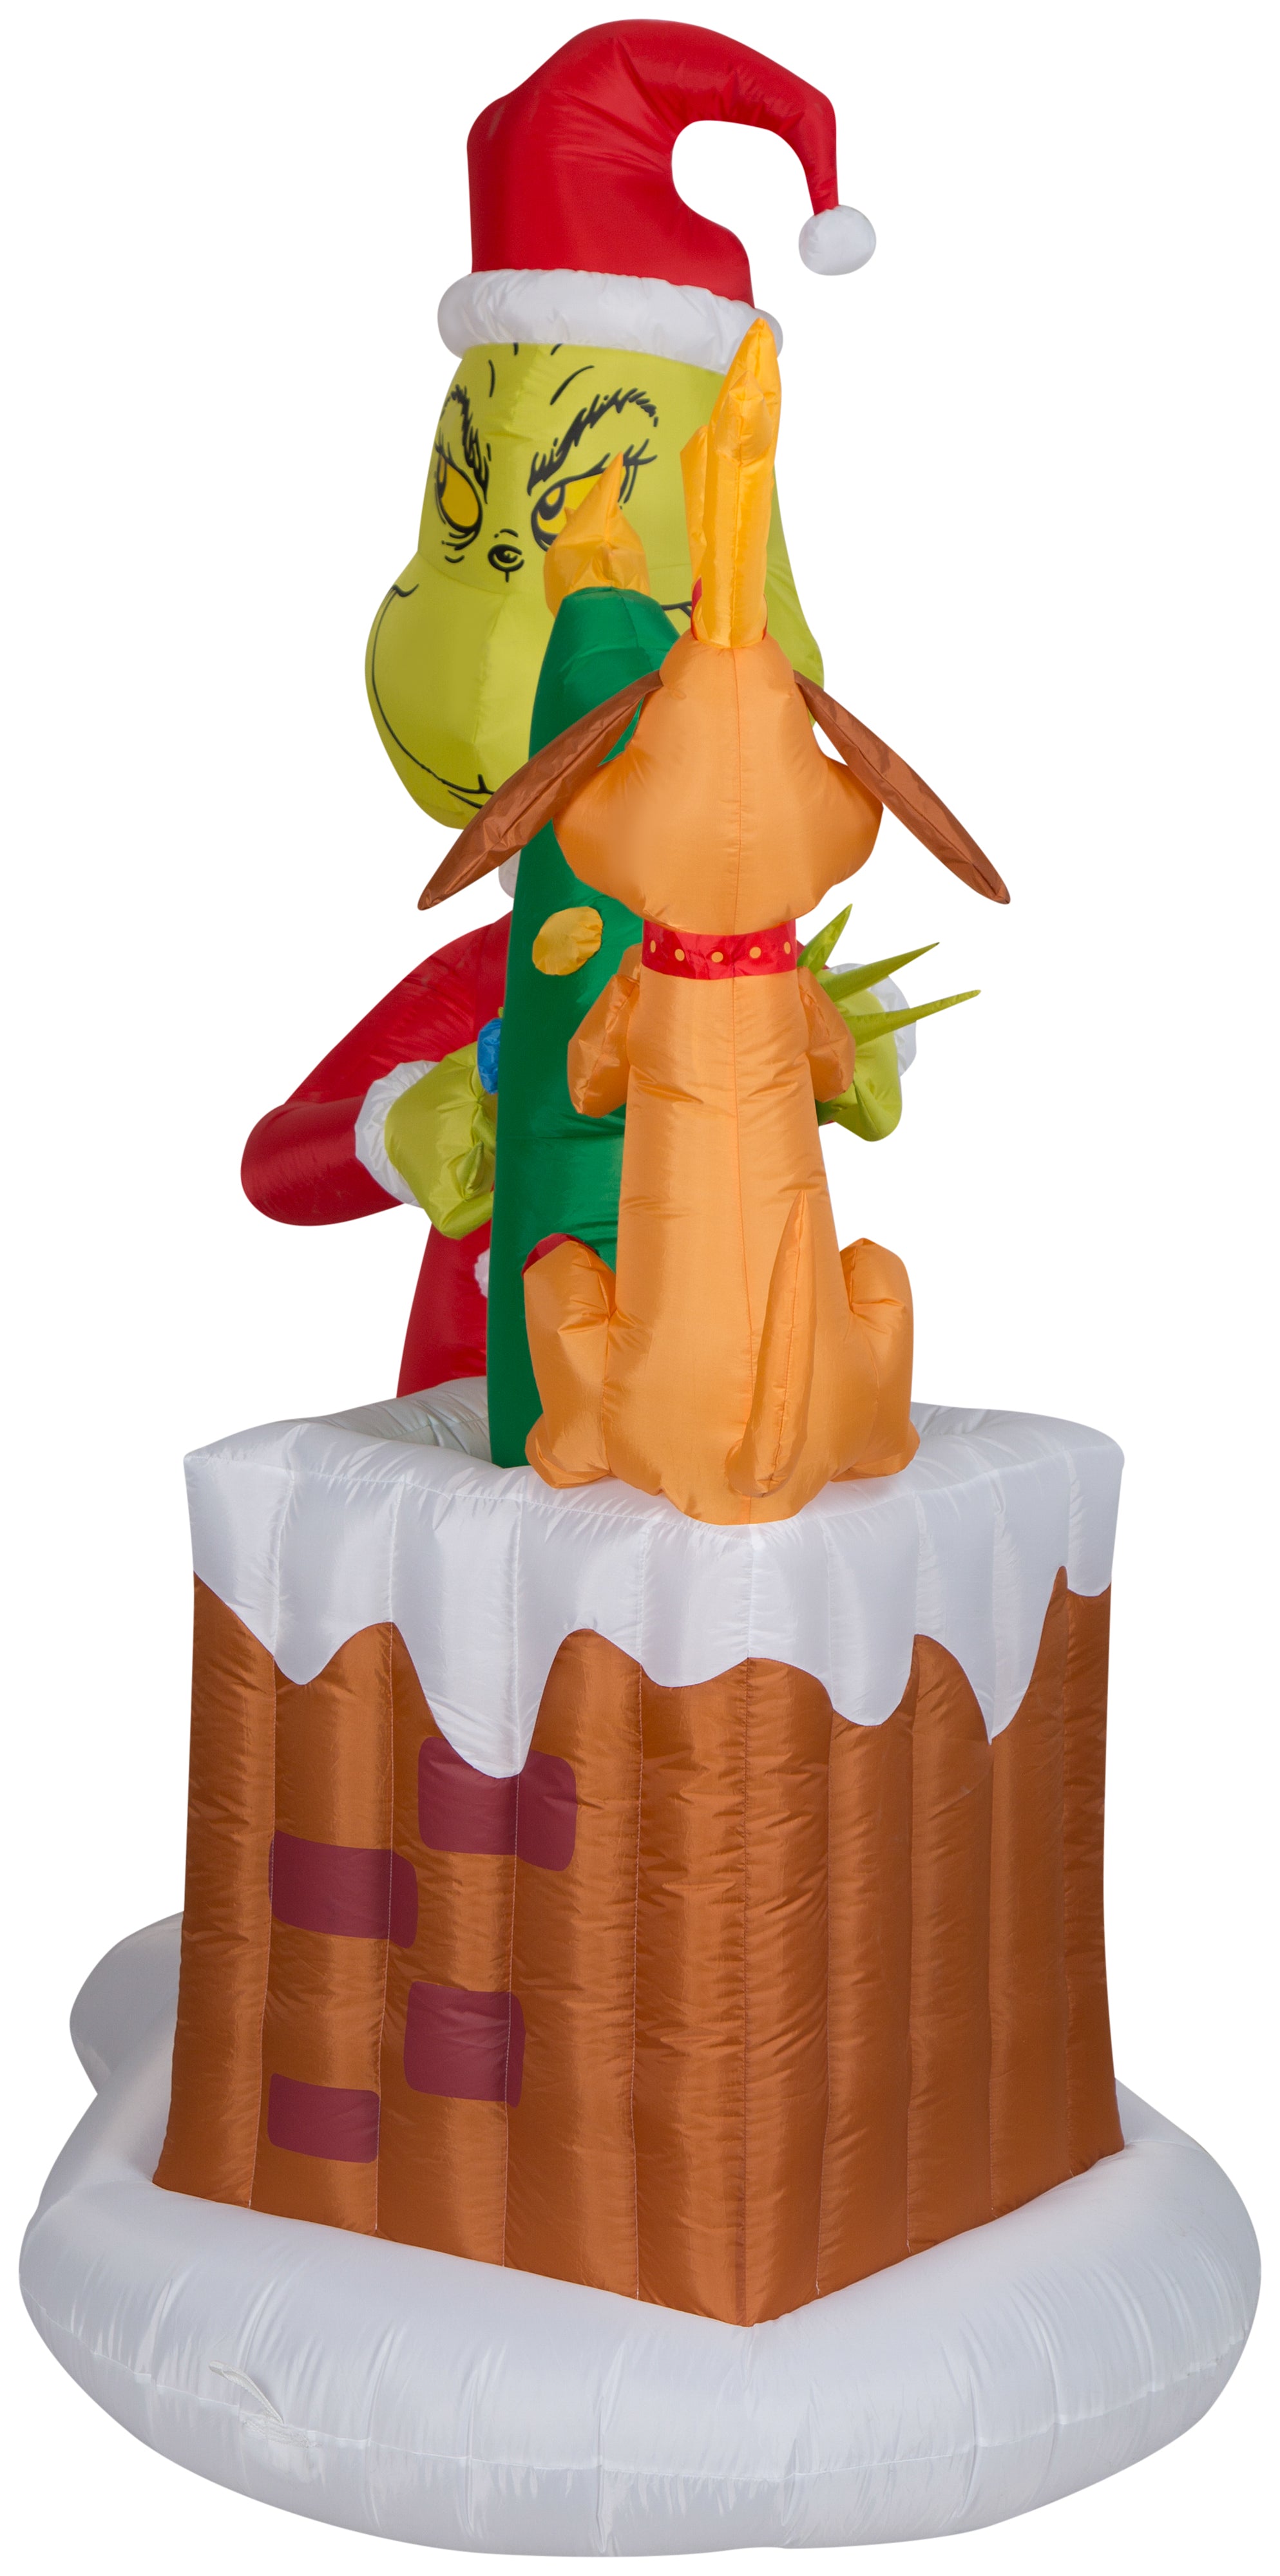 Gemmy Animated Airblown Inflatable Grinch Pulling Tree from Chimney Scene Dr. Seuss, 6.5 ft Tall